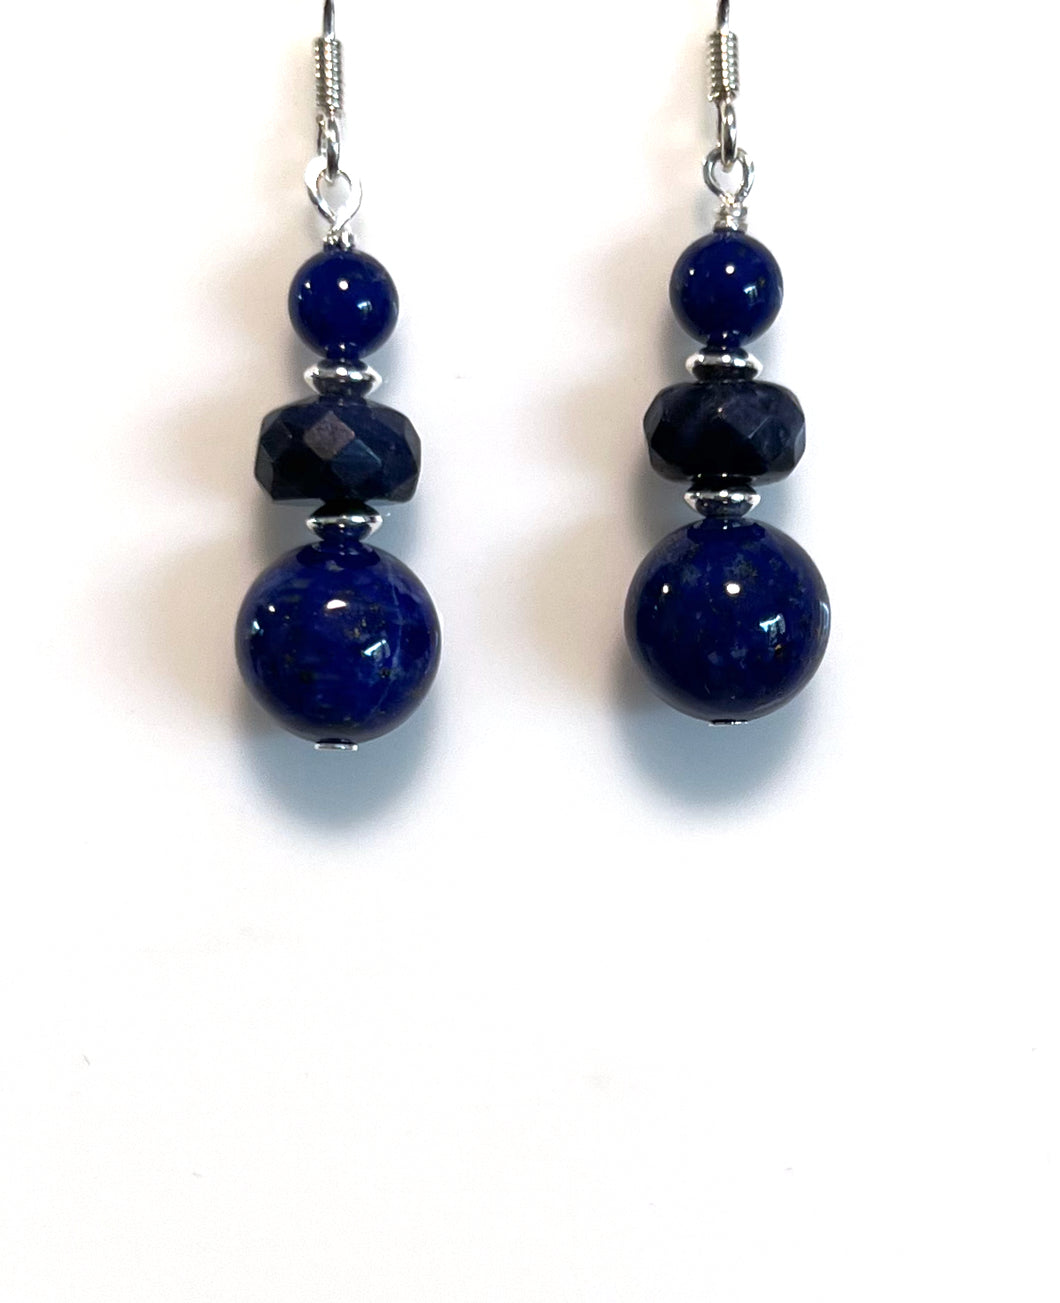 Blue Earrings with Lapis Lazuli Dumortierite and Sterling Silver